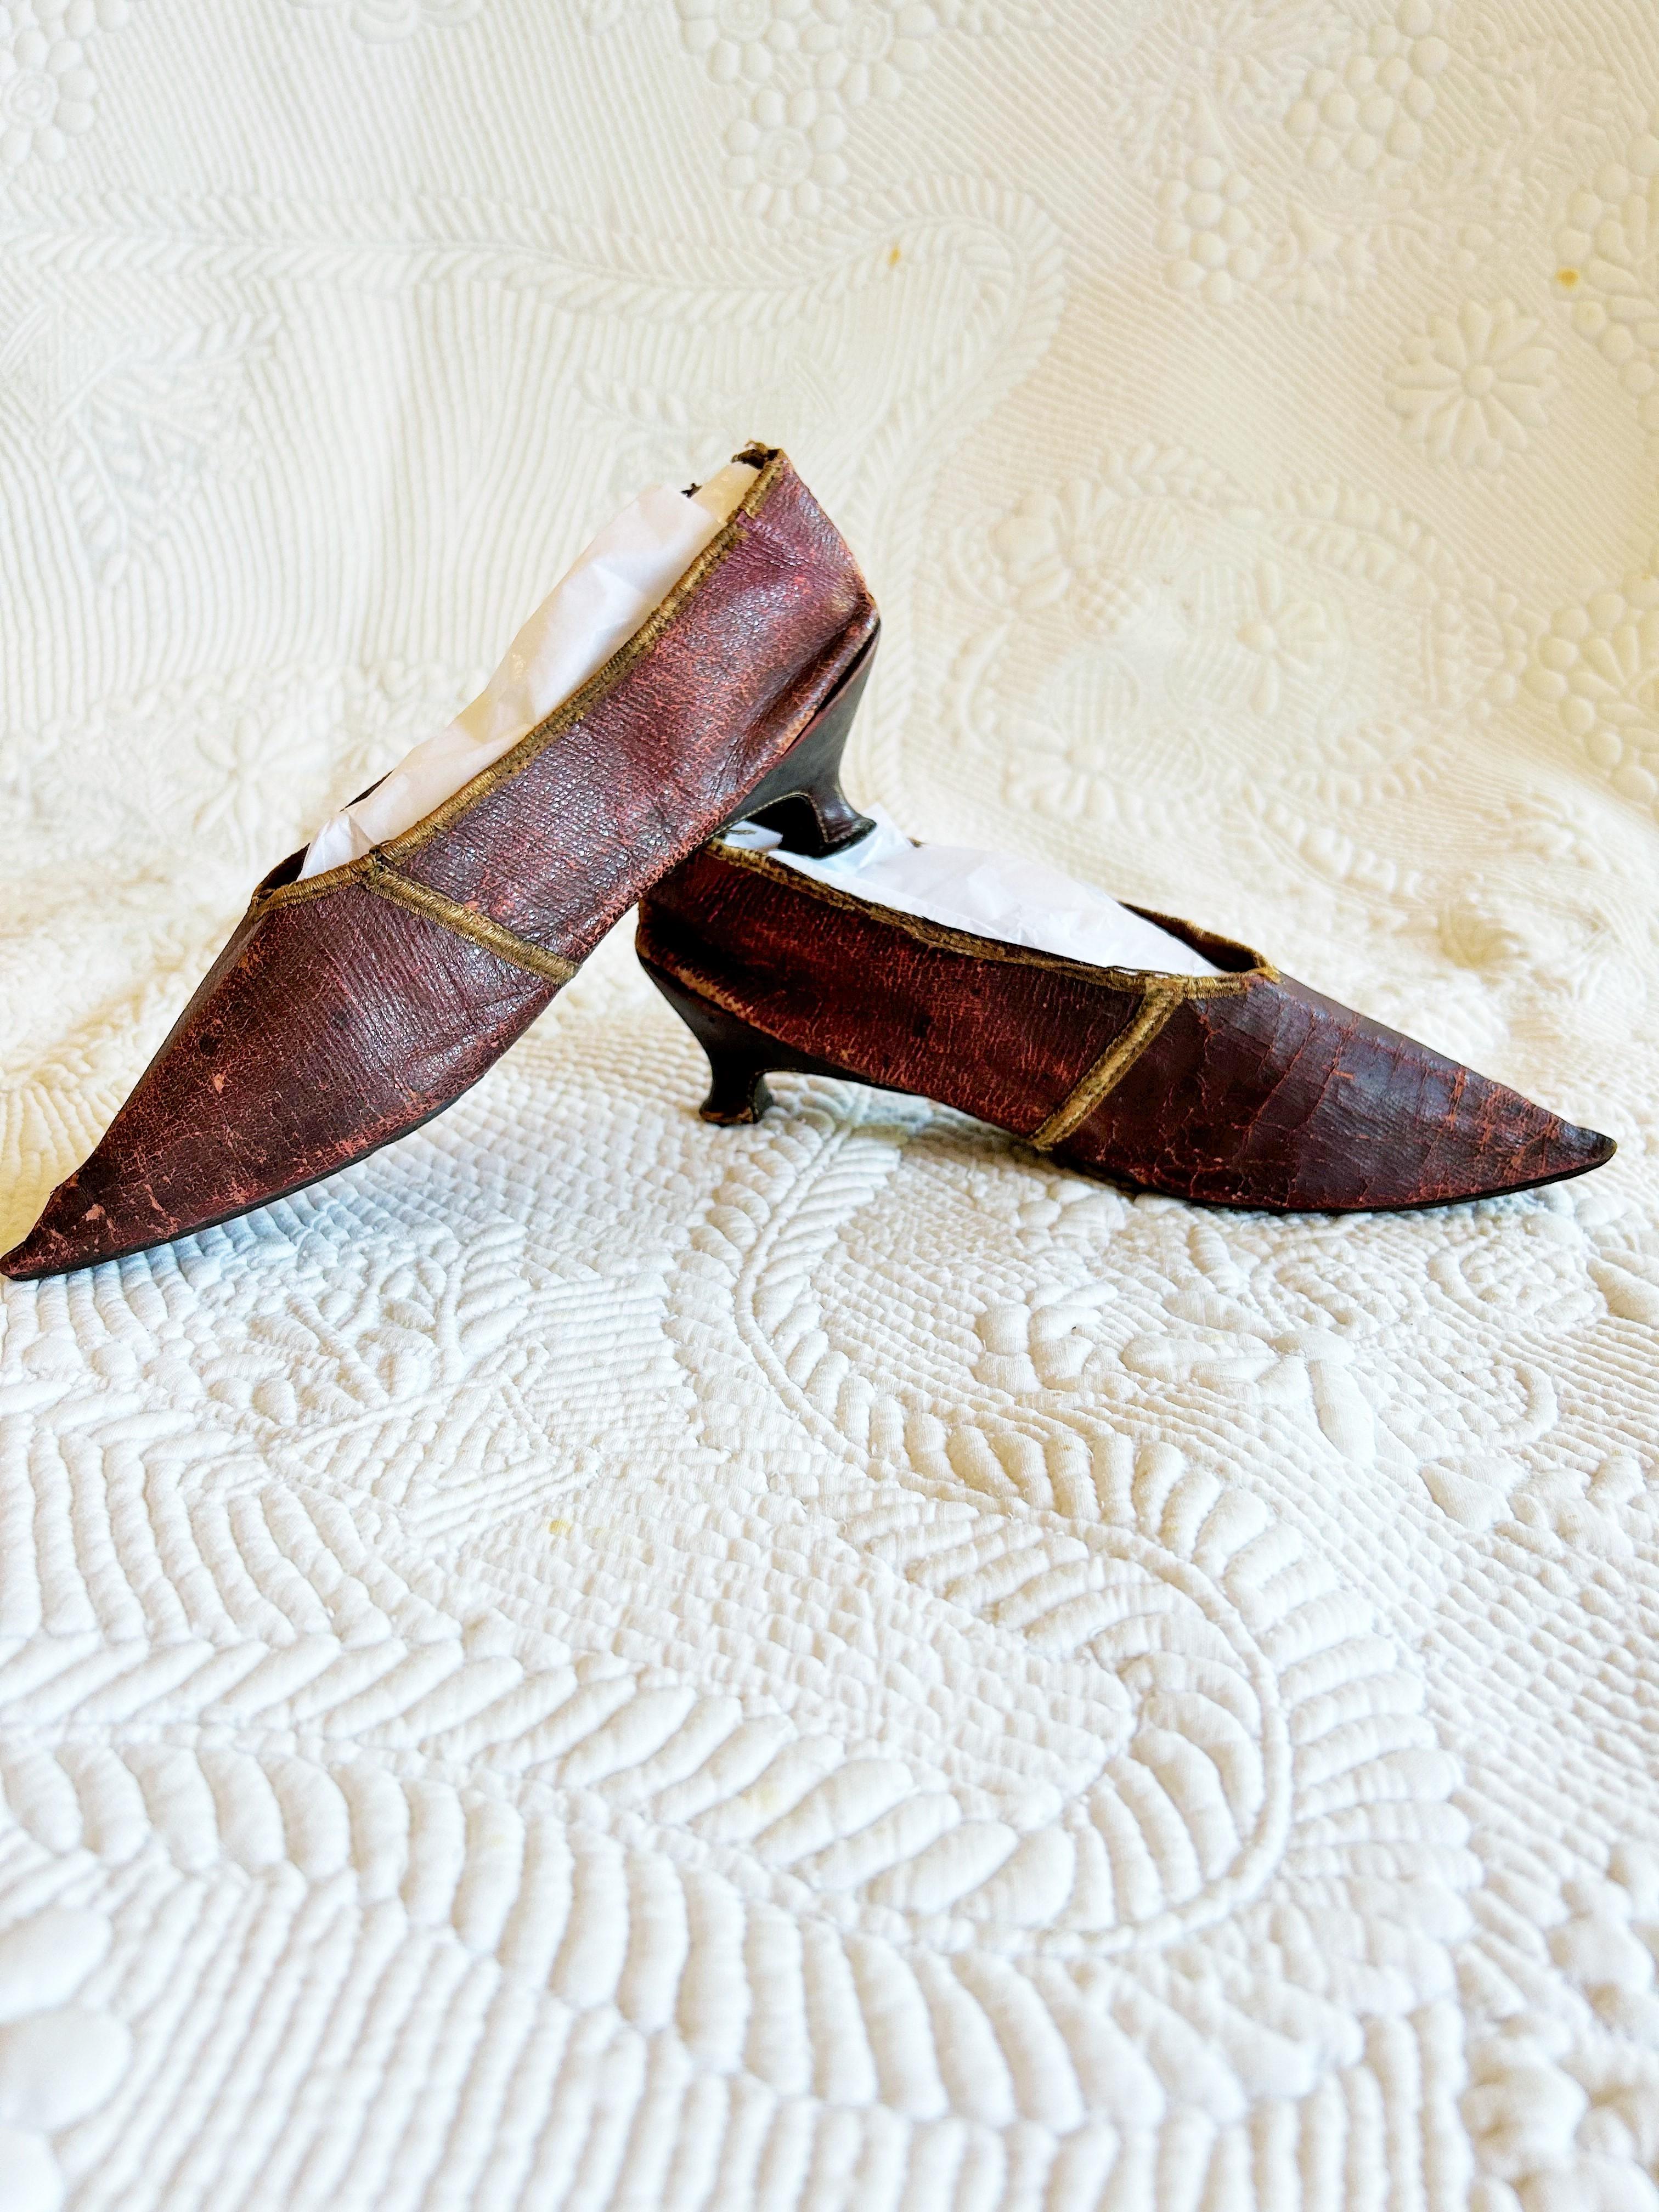 Circa 1790-1800
France or Europe
Elegant pair of burgundy leather Stiletto heel shoes dating from the late 18th century. Pointed toe vamp and small coil heel, typical of the fashion of the period. Light brown chintz lining with drawstring and orange